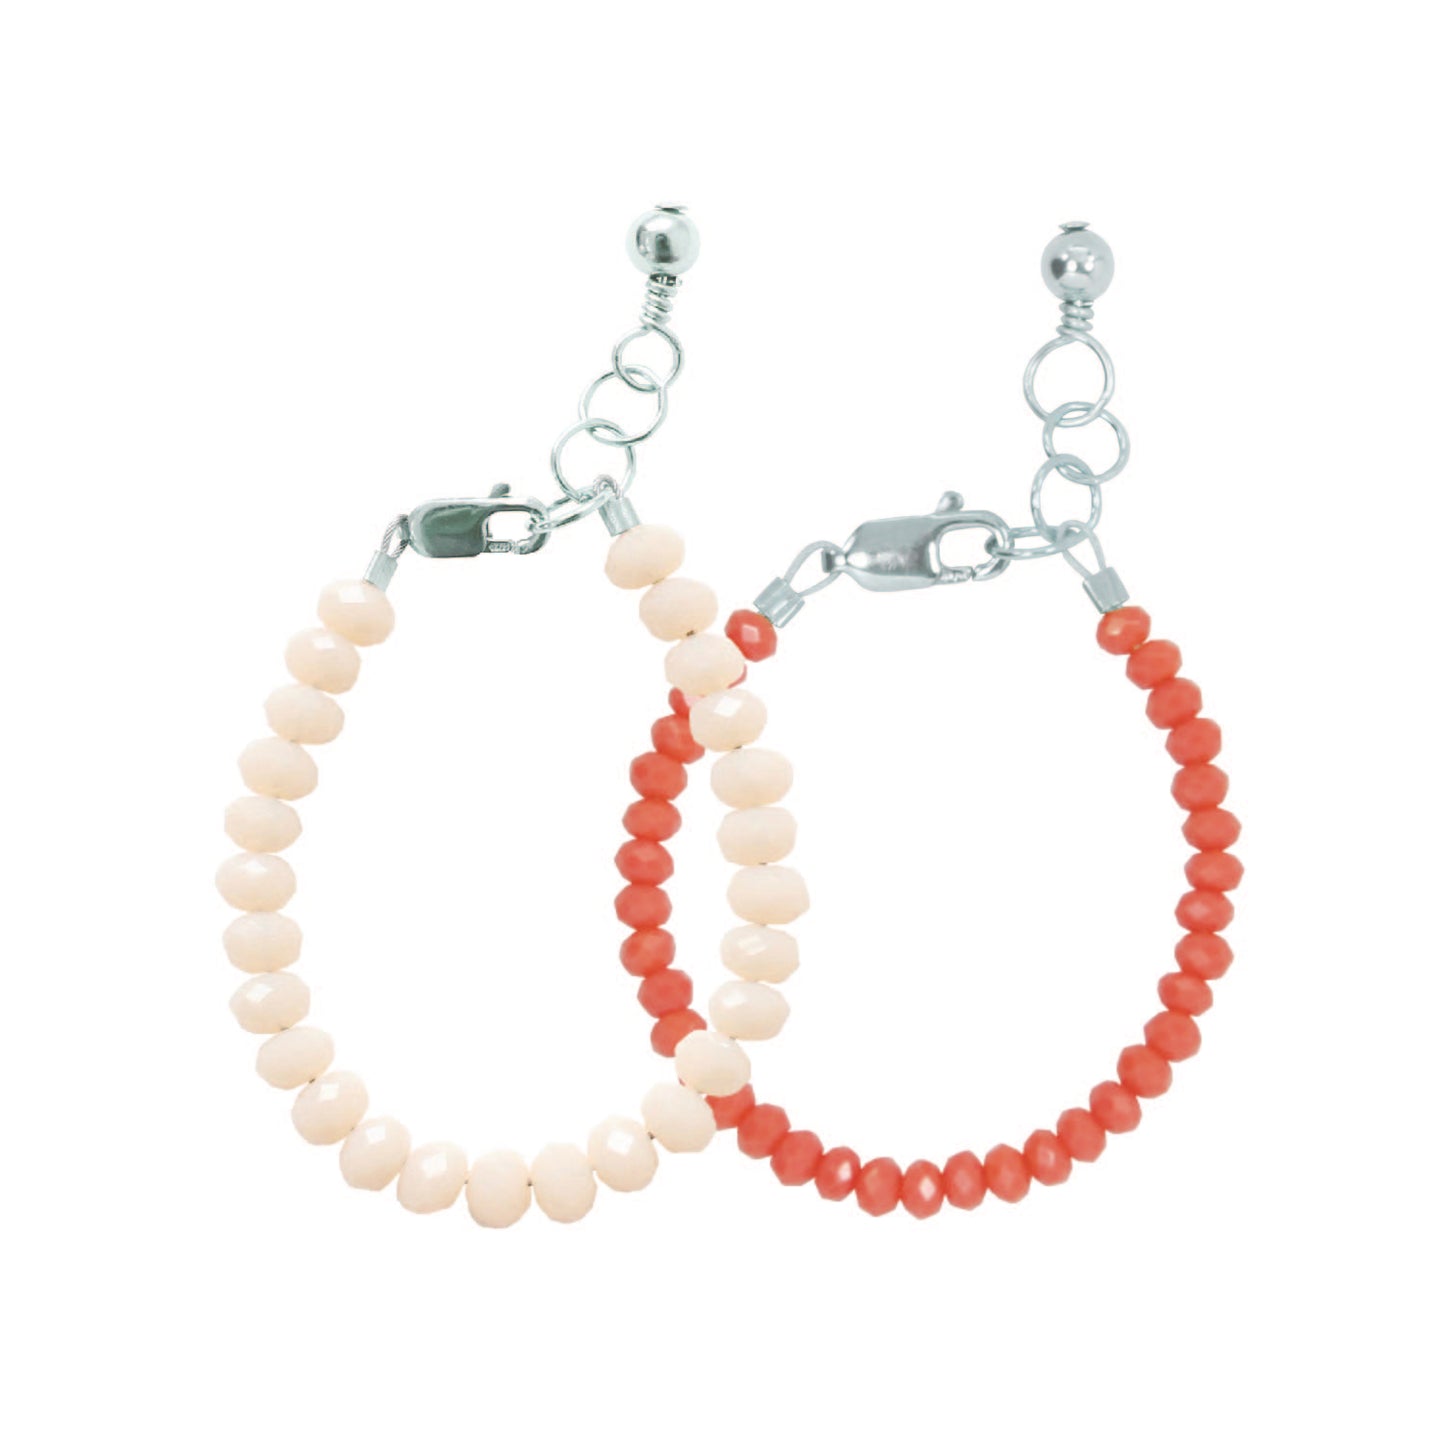 Moana Baby Bracelet Two-Pack (3mm+4mm beads)